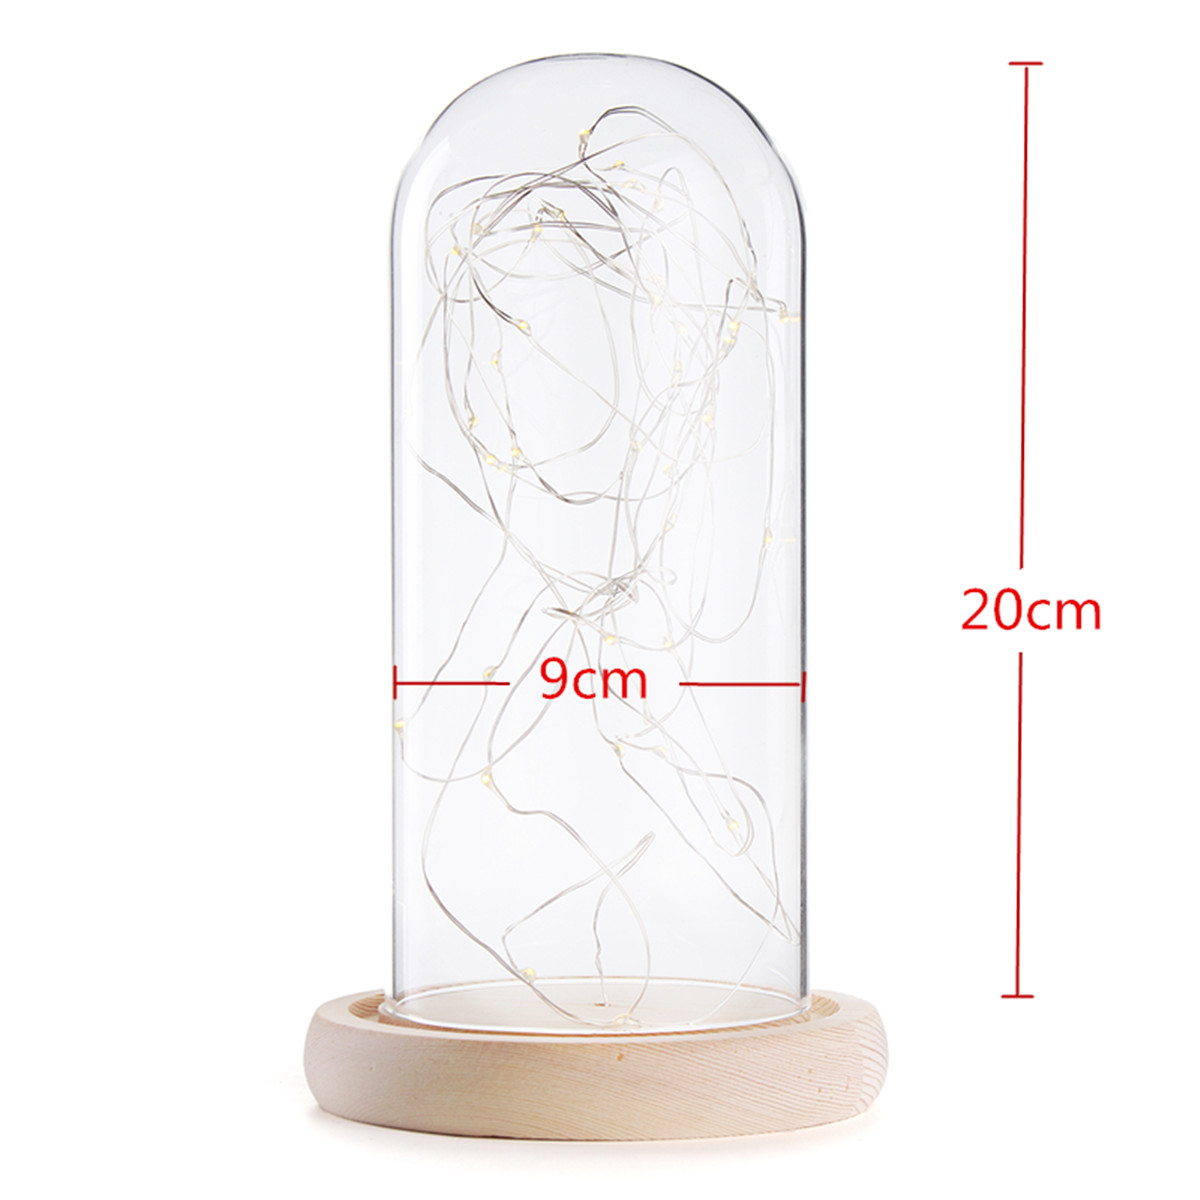 920cm-Glass-Dome-Bell-Jar-Cloche-Display-Wooden-Base-With-Fairy-LED-Lights-Decorations-1420898